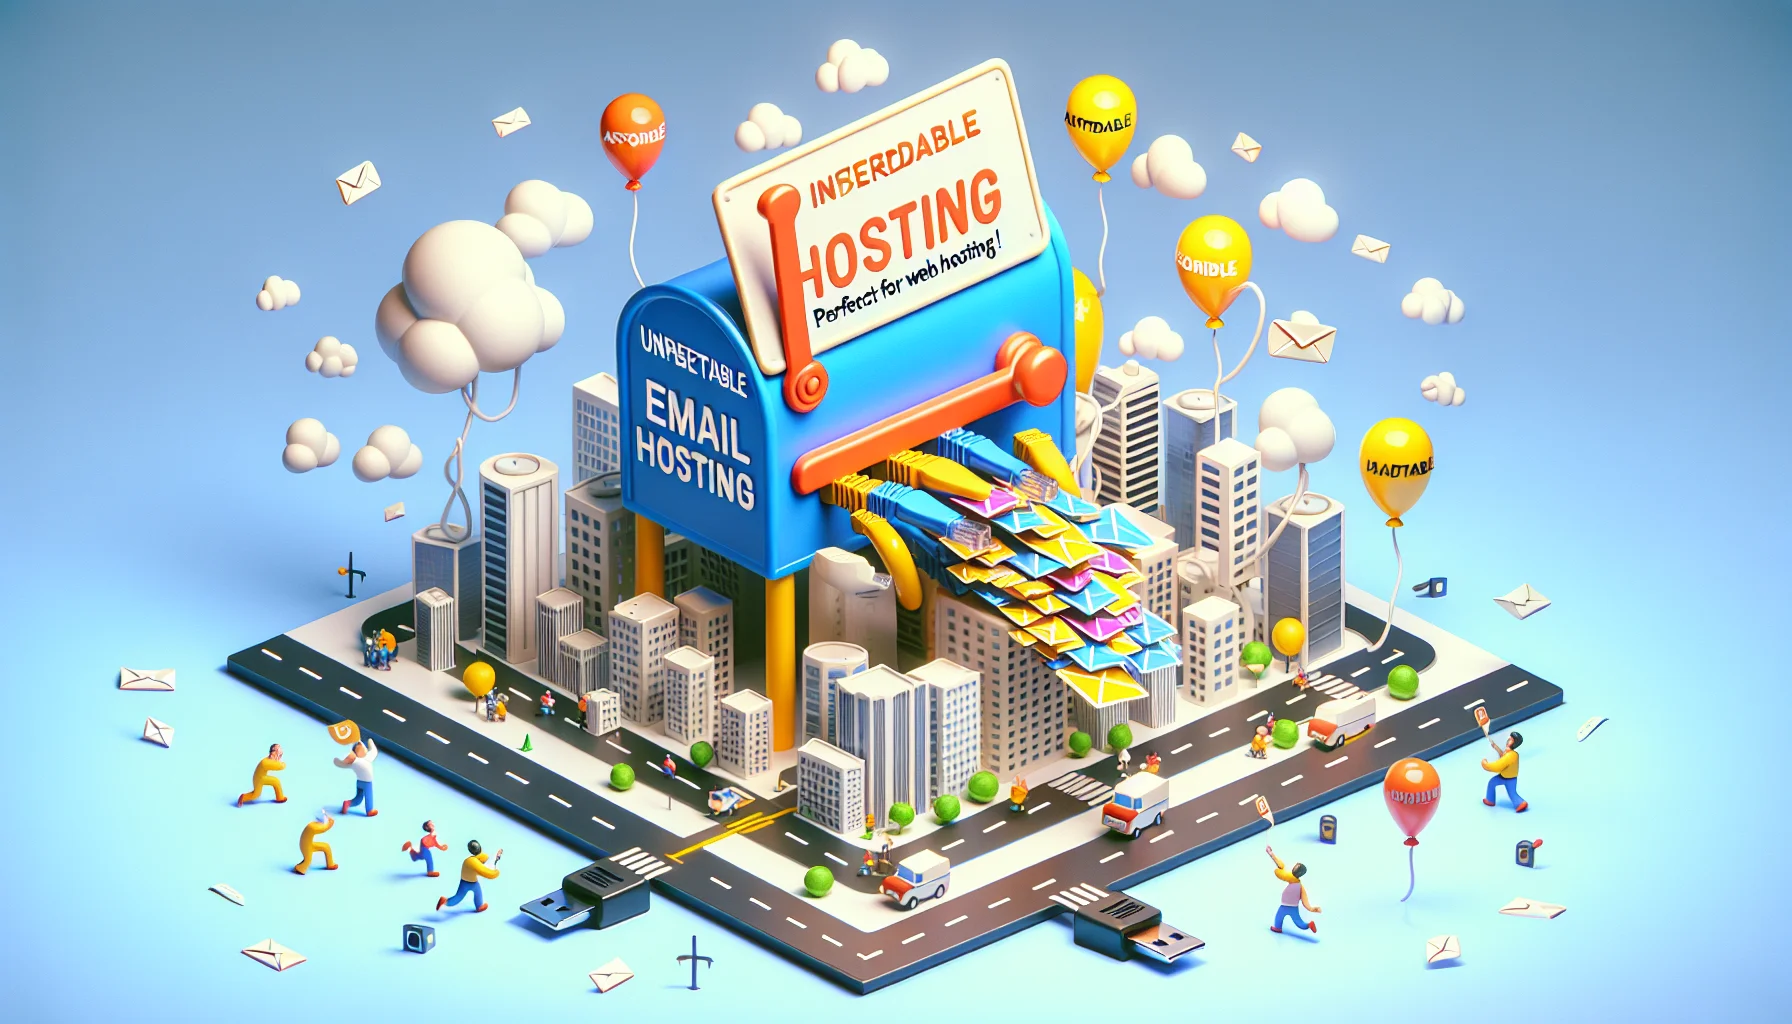 Imagine an amusing scene showcasing inexpensive email hosting in a compelling light. There is a cute and giant mailbox icon exaggerated in size, towering over a miniature city skyline. Scurrying around it, cartoon individuals visibly awed by the towering mailbox are busy plugging in humorous oversized ethernet cables. The mailbox itself is funnily brimming with colorful envelopes which are raining onto the miniature city, symbolizing the ample storage for emails. Balloons with 'affordable' and 'reliable' are floating around to suggest the cost-effective and dependable nature of the service. An enormous banner with a playful font announces 'Unbeatable Email hosting, perfect for Web Hosting!'